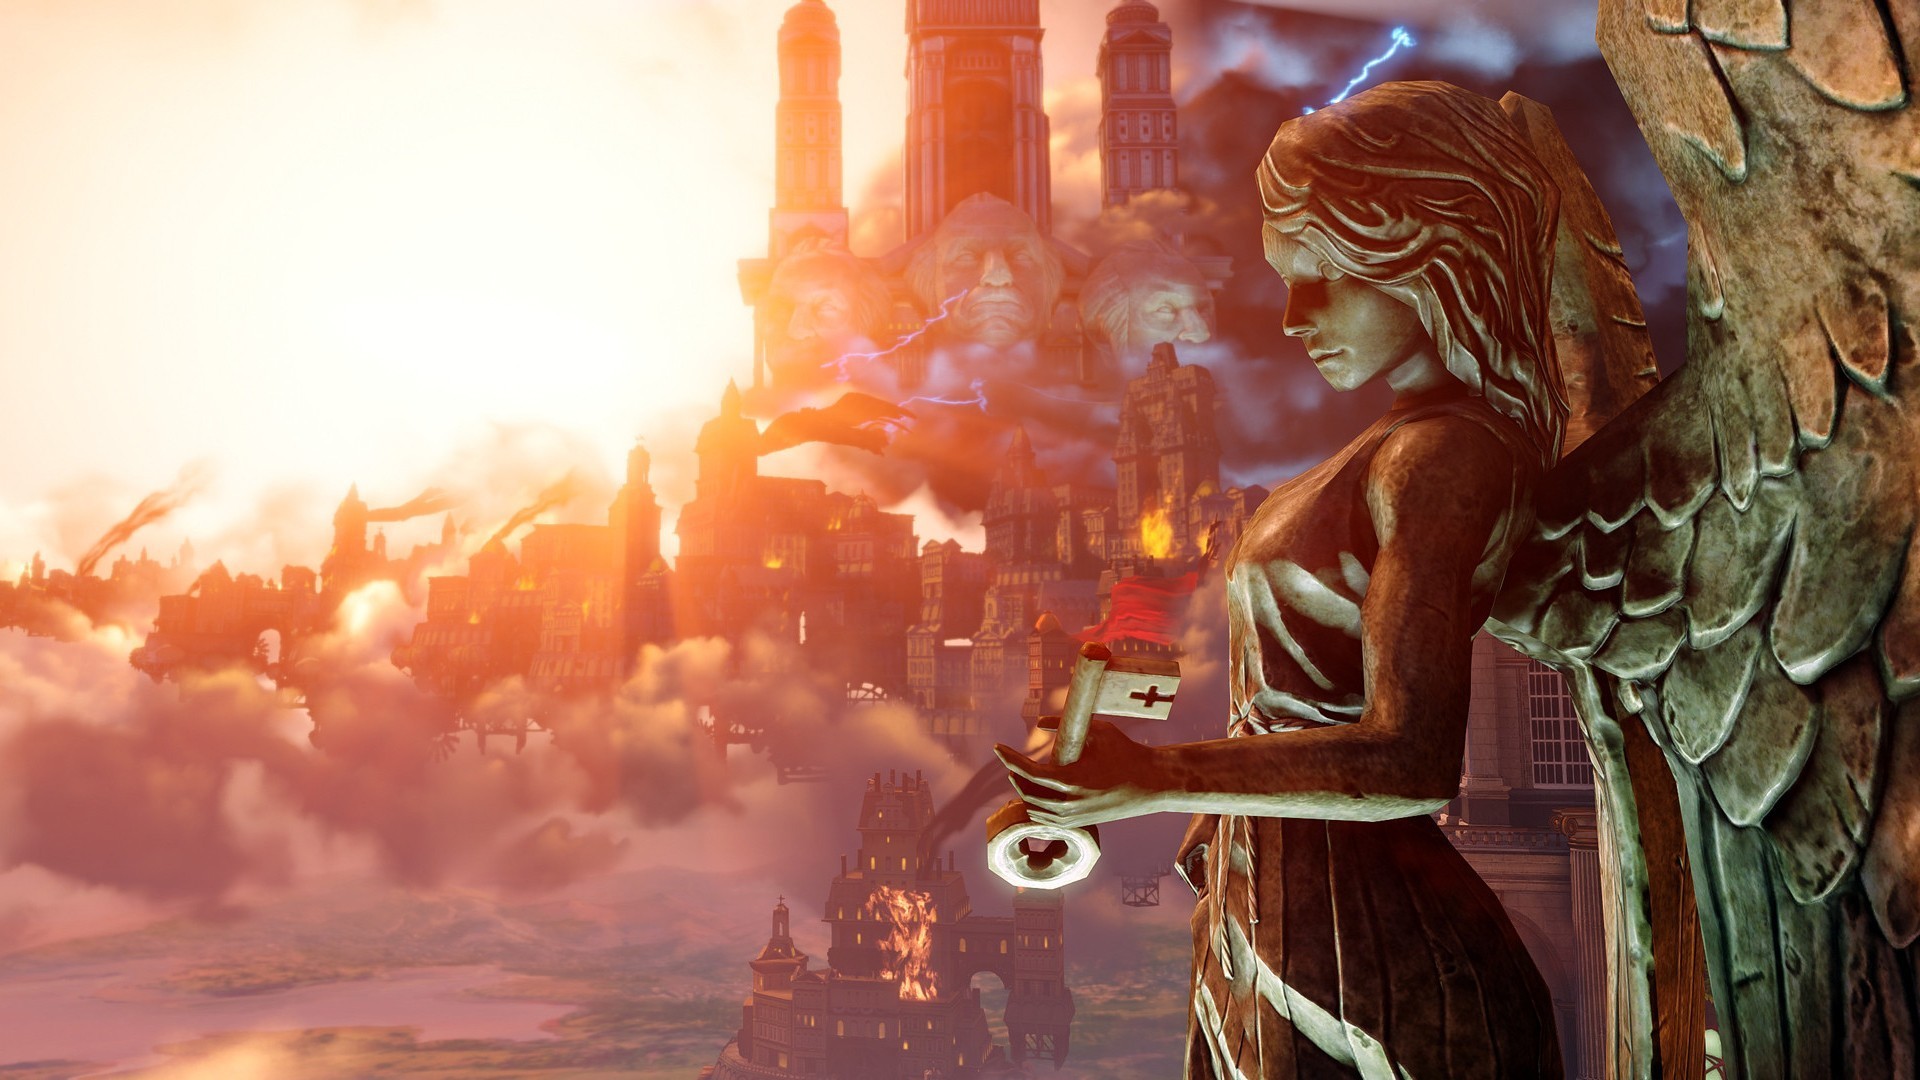 1920x1080 Bioshock Infinite Wallpaper Collection For Free Download